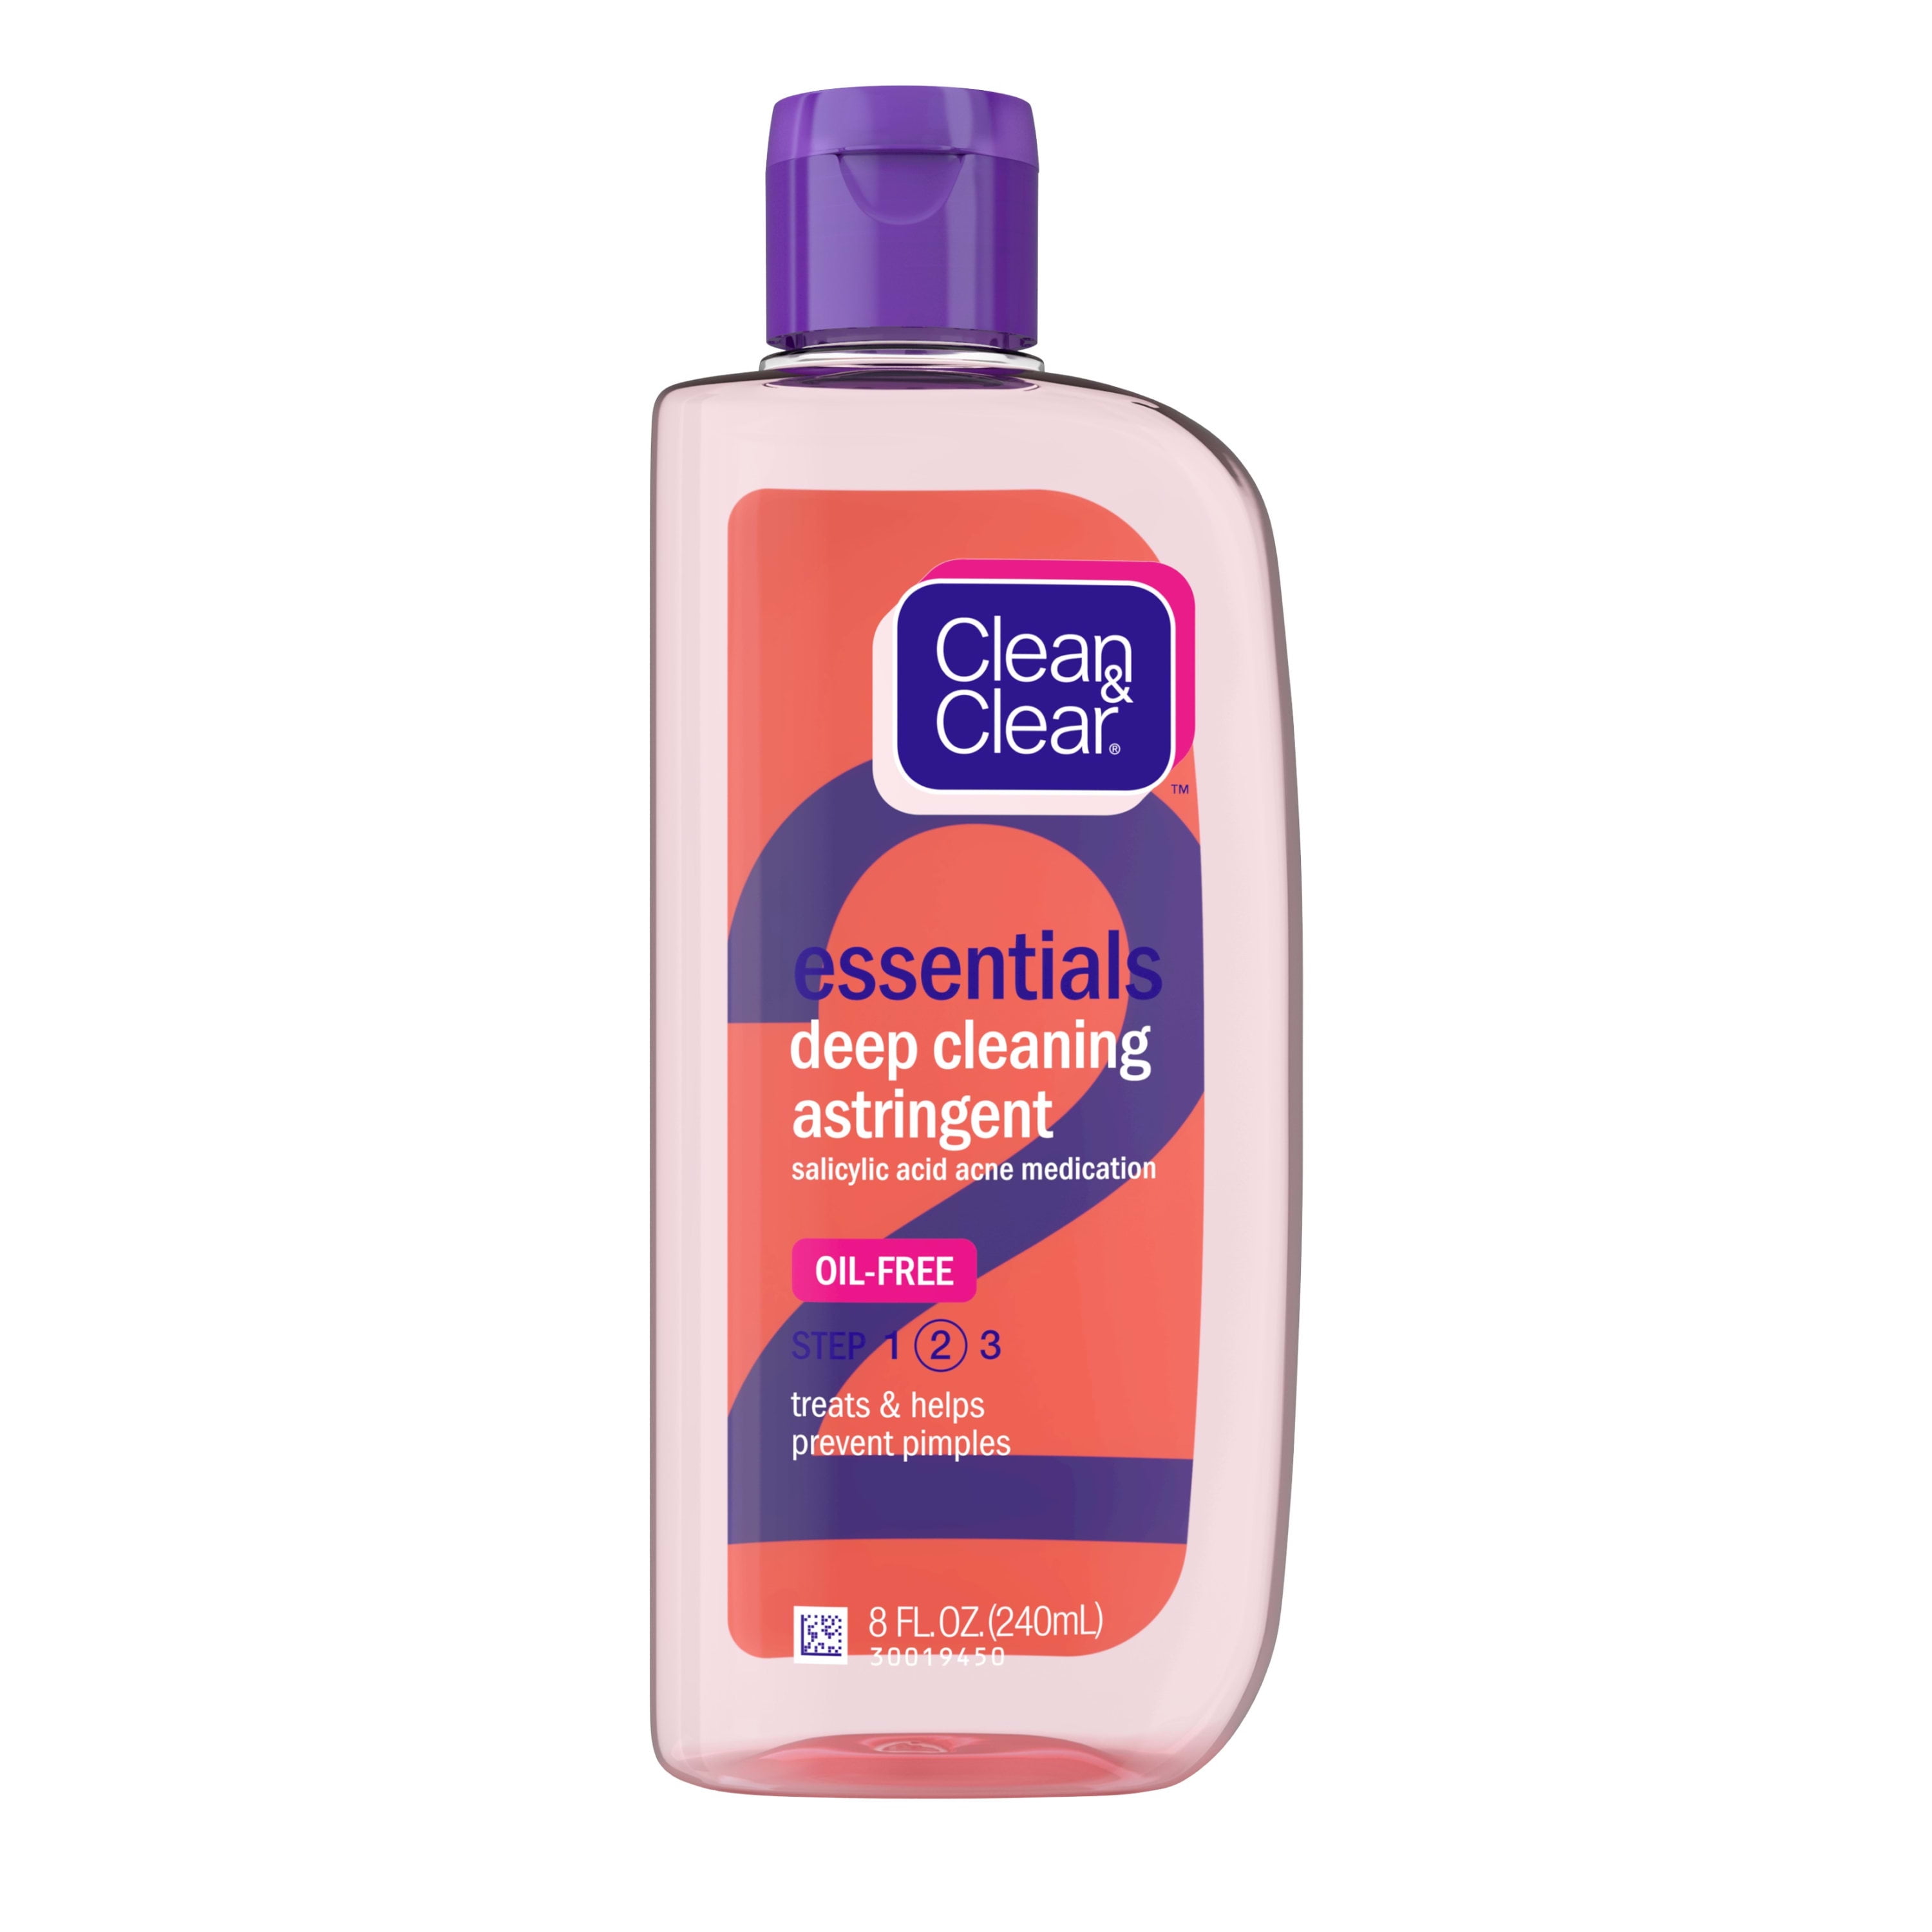 Clean & Clear Essentials Oil-Free Deep Cleaning Astringent, 8 fl. oz